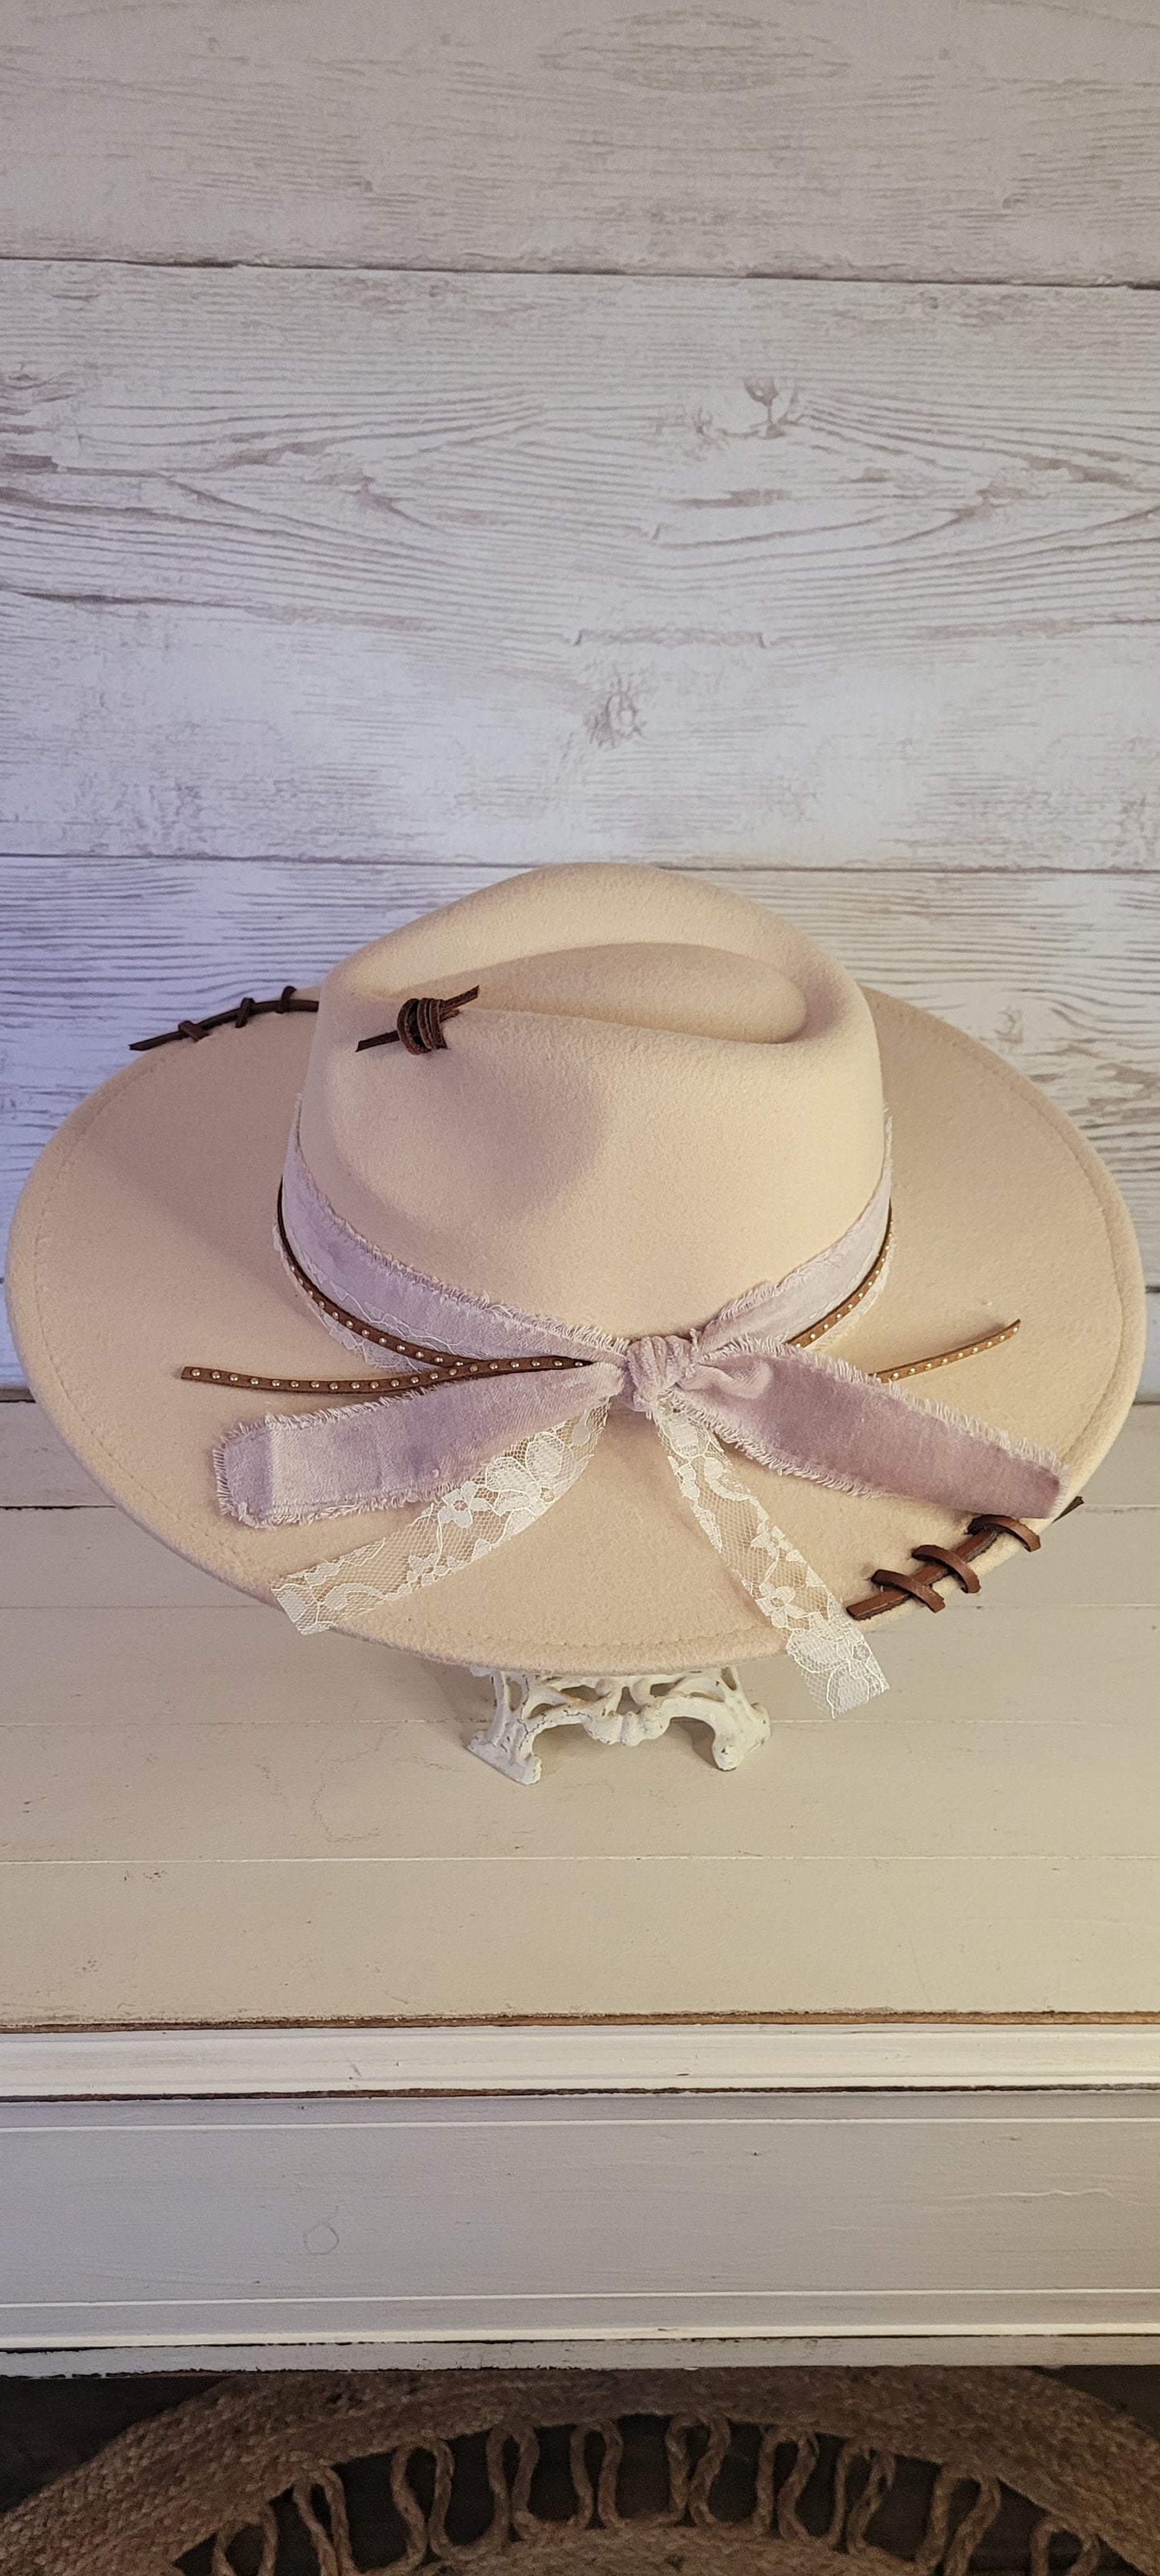 Features velvet mushroom ribbon, lace ribbon, leather band with metal detailing, & leather sewn into brim & crown Felt hat Flat brim 65% polyester and 35% cotton Ribbon drawstring for hat size adjustment Head Circumference: 24" Crown Height: 5" Brim Length: 15.75" Brim Width: 14.5" Branded & numbered inside crown Custom designed by Kayla